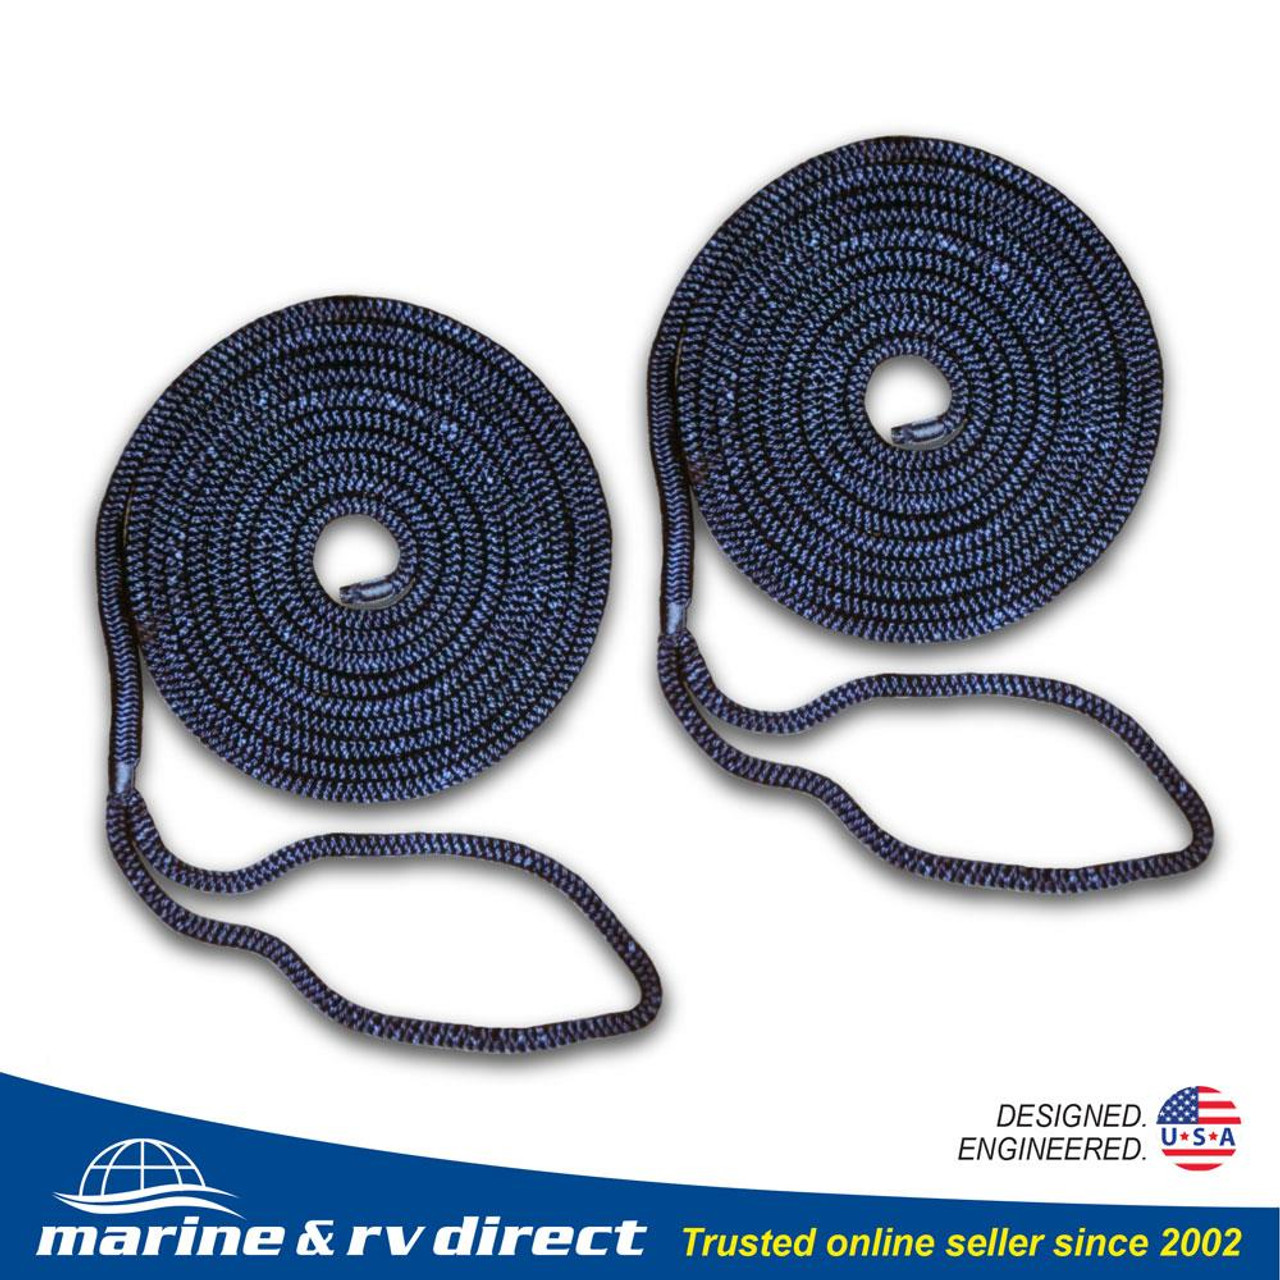 Dock Lines Boat Ropes for Docking 3/8 Line Braided Mooring Marine Rope  15FT Blue 2 Pack